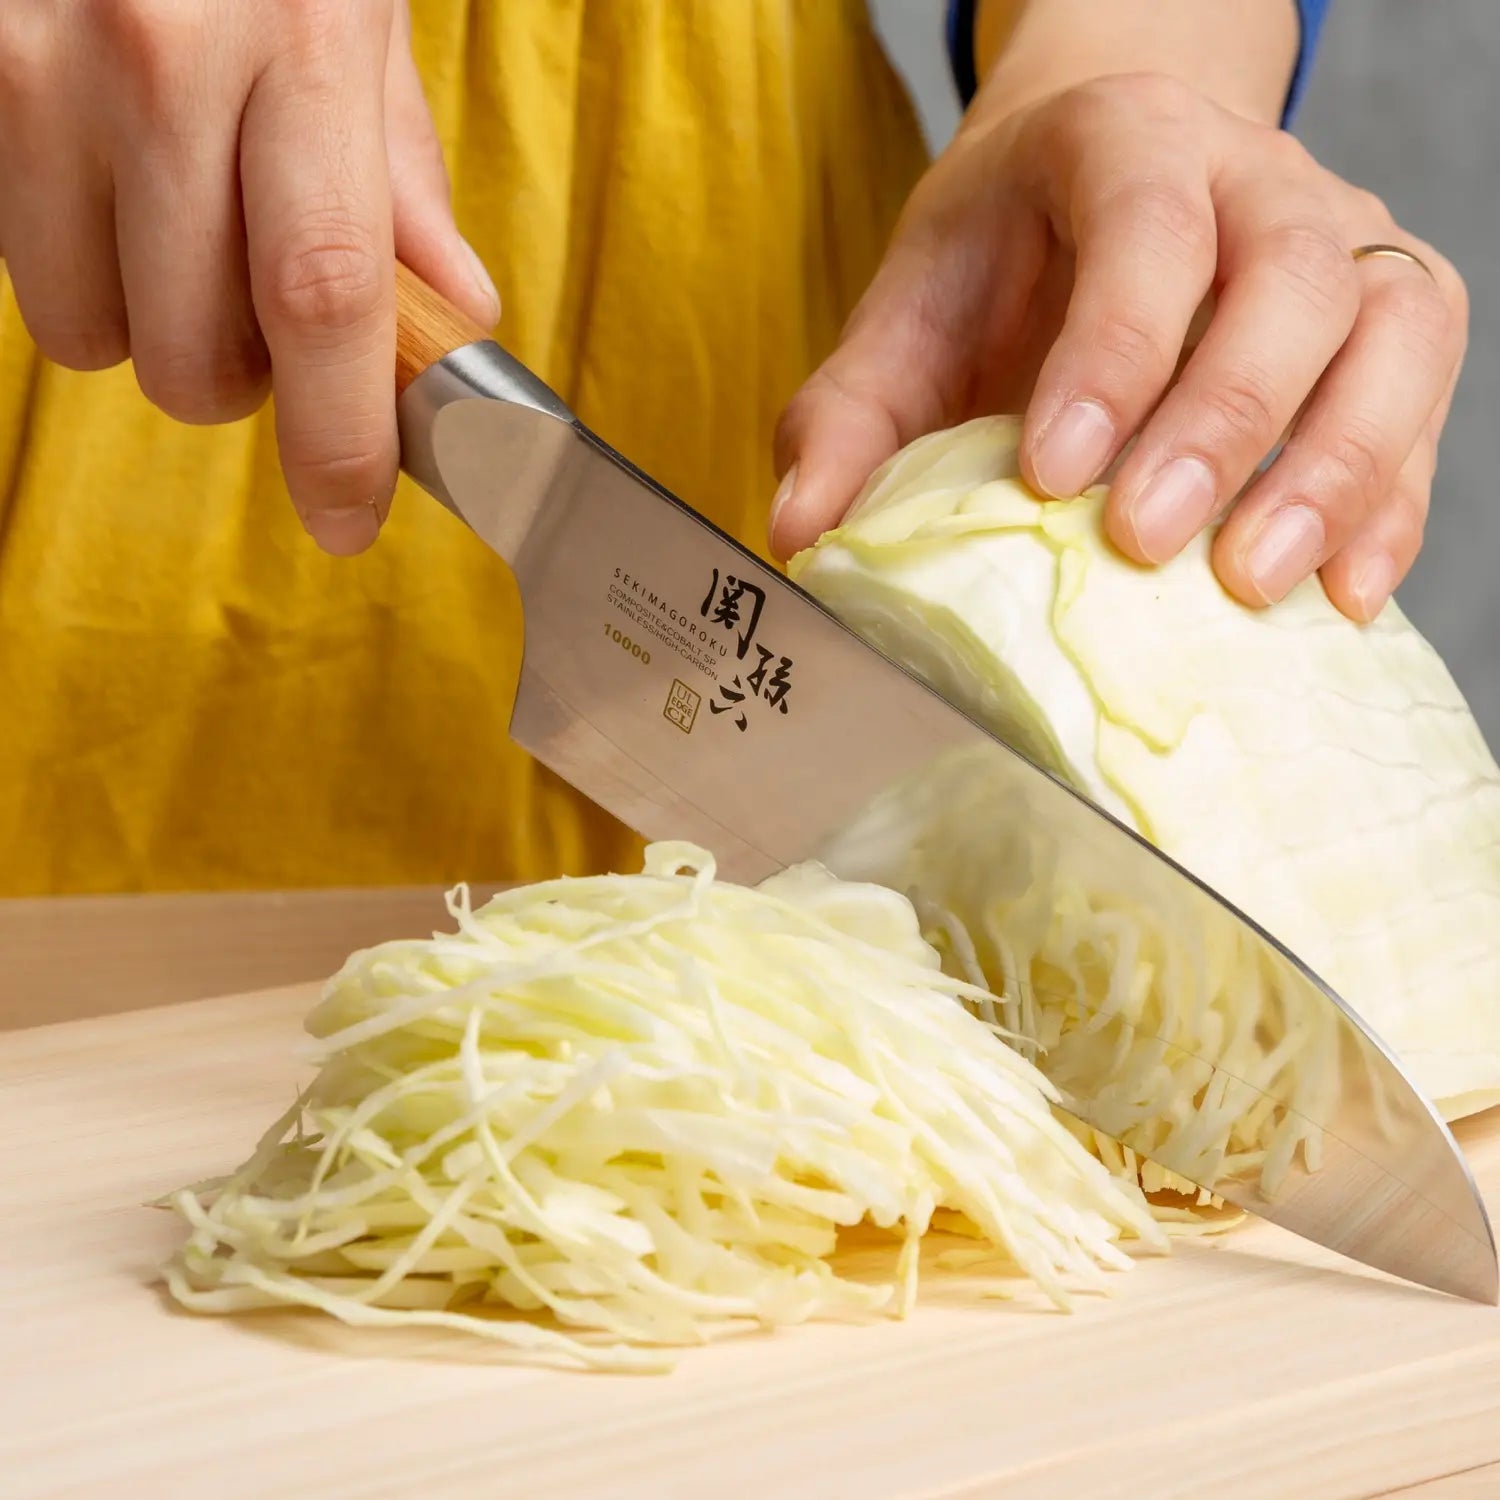 10 Must-Have Japanese Kitchen and Cookware Gadgets